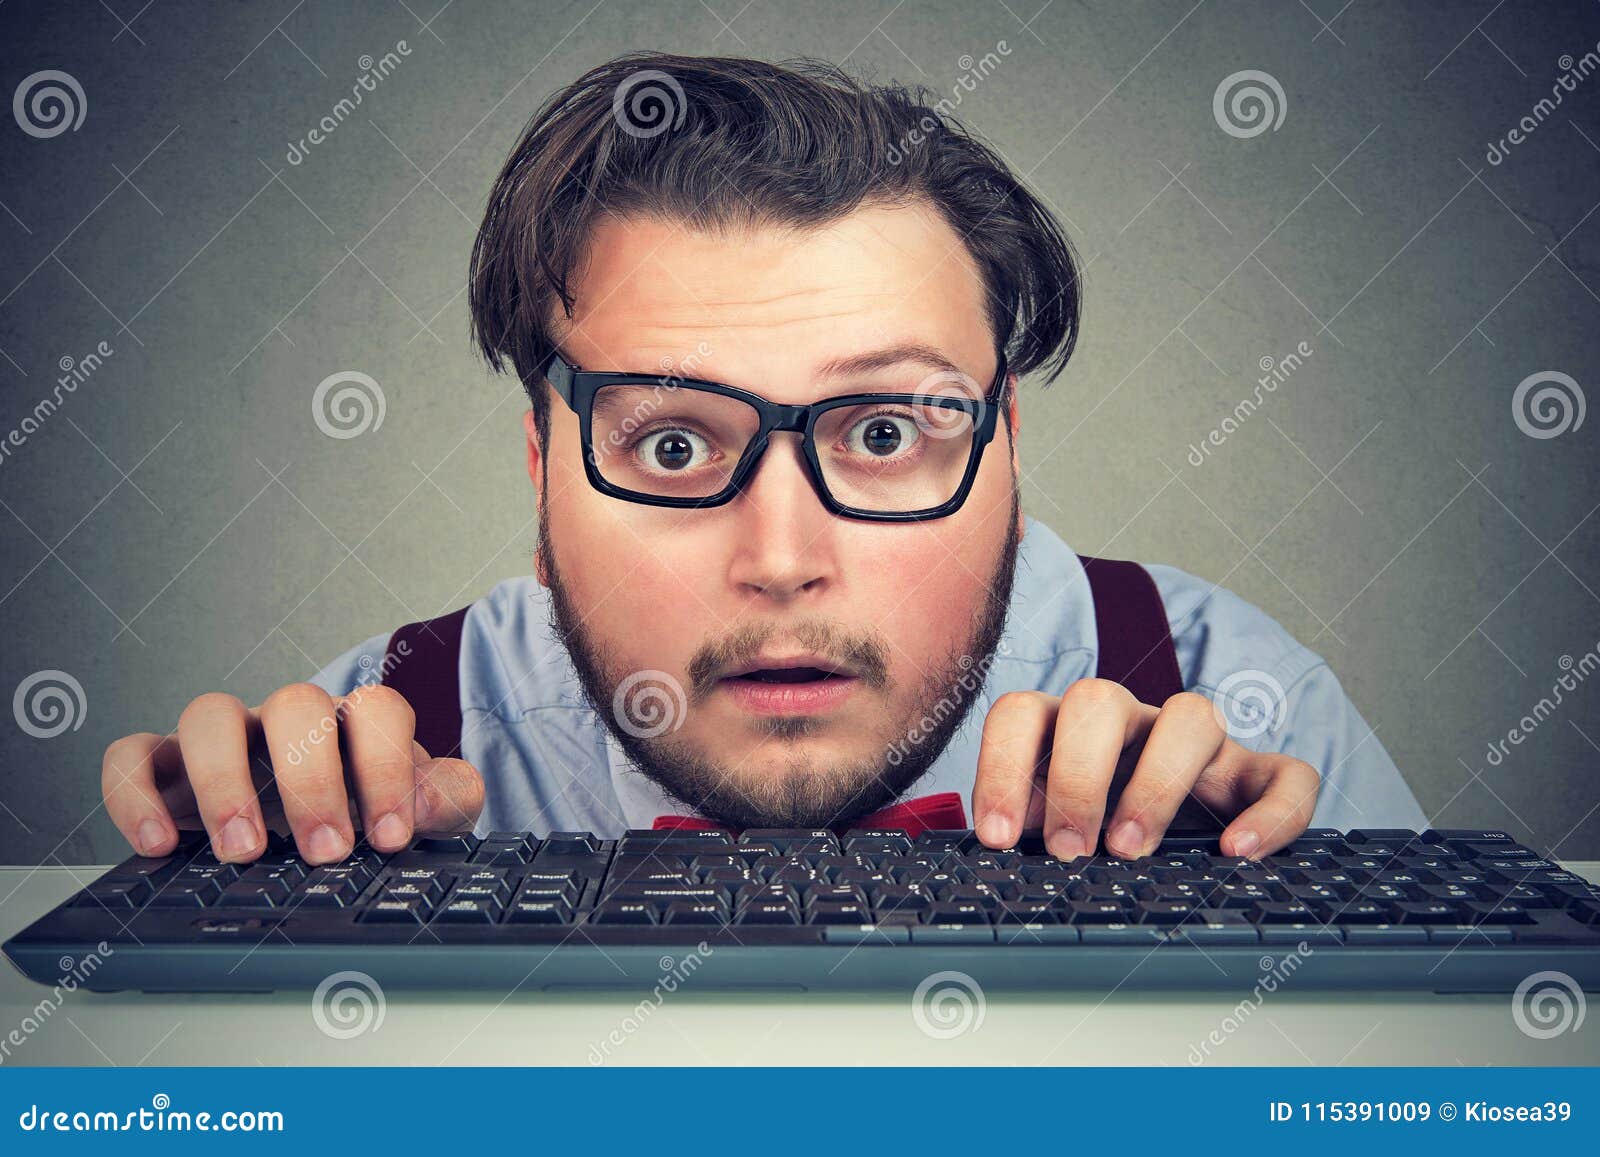 surprised business man typing on key board